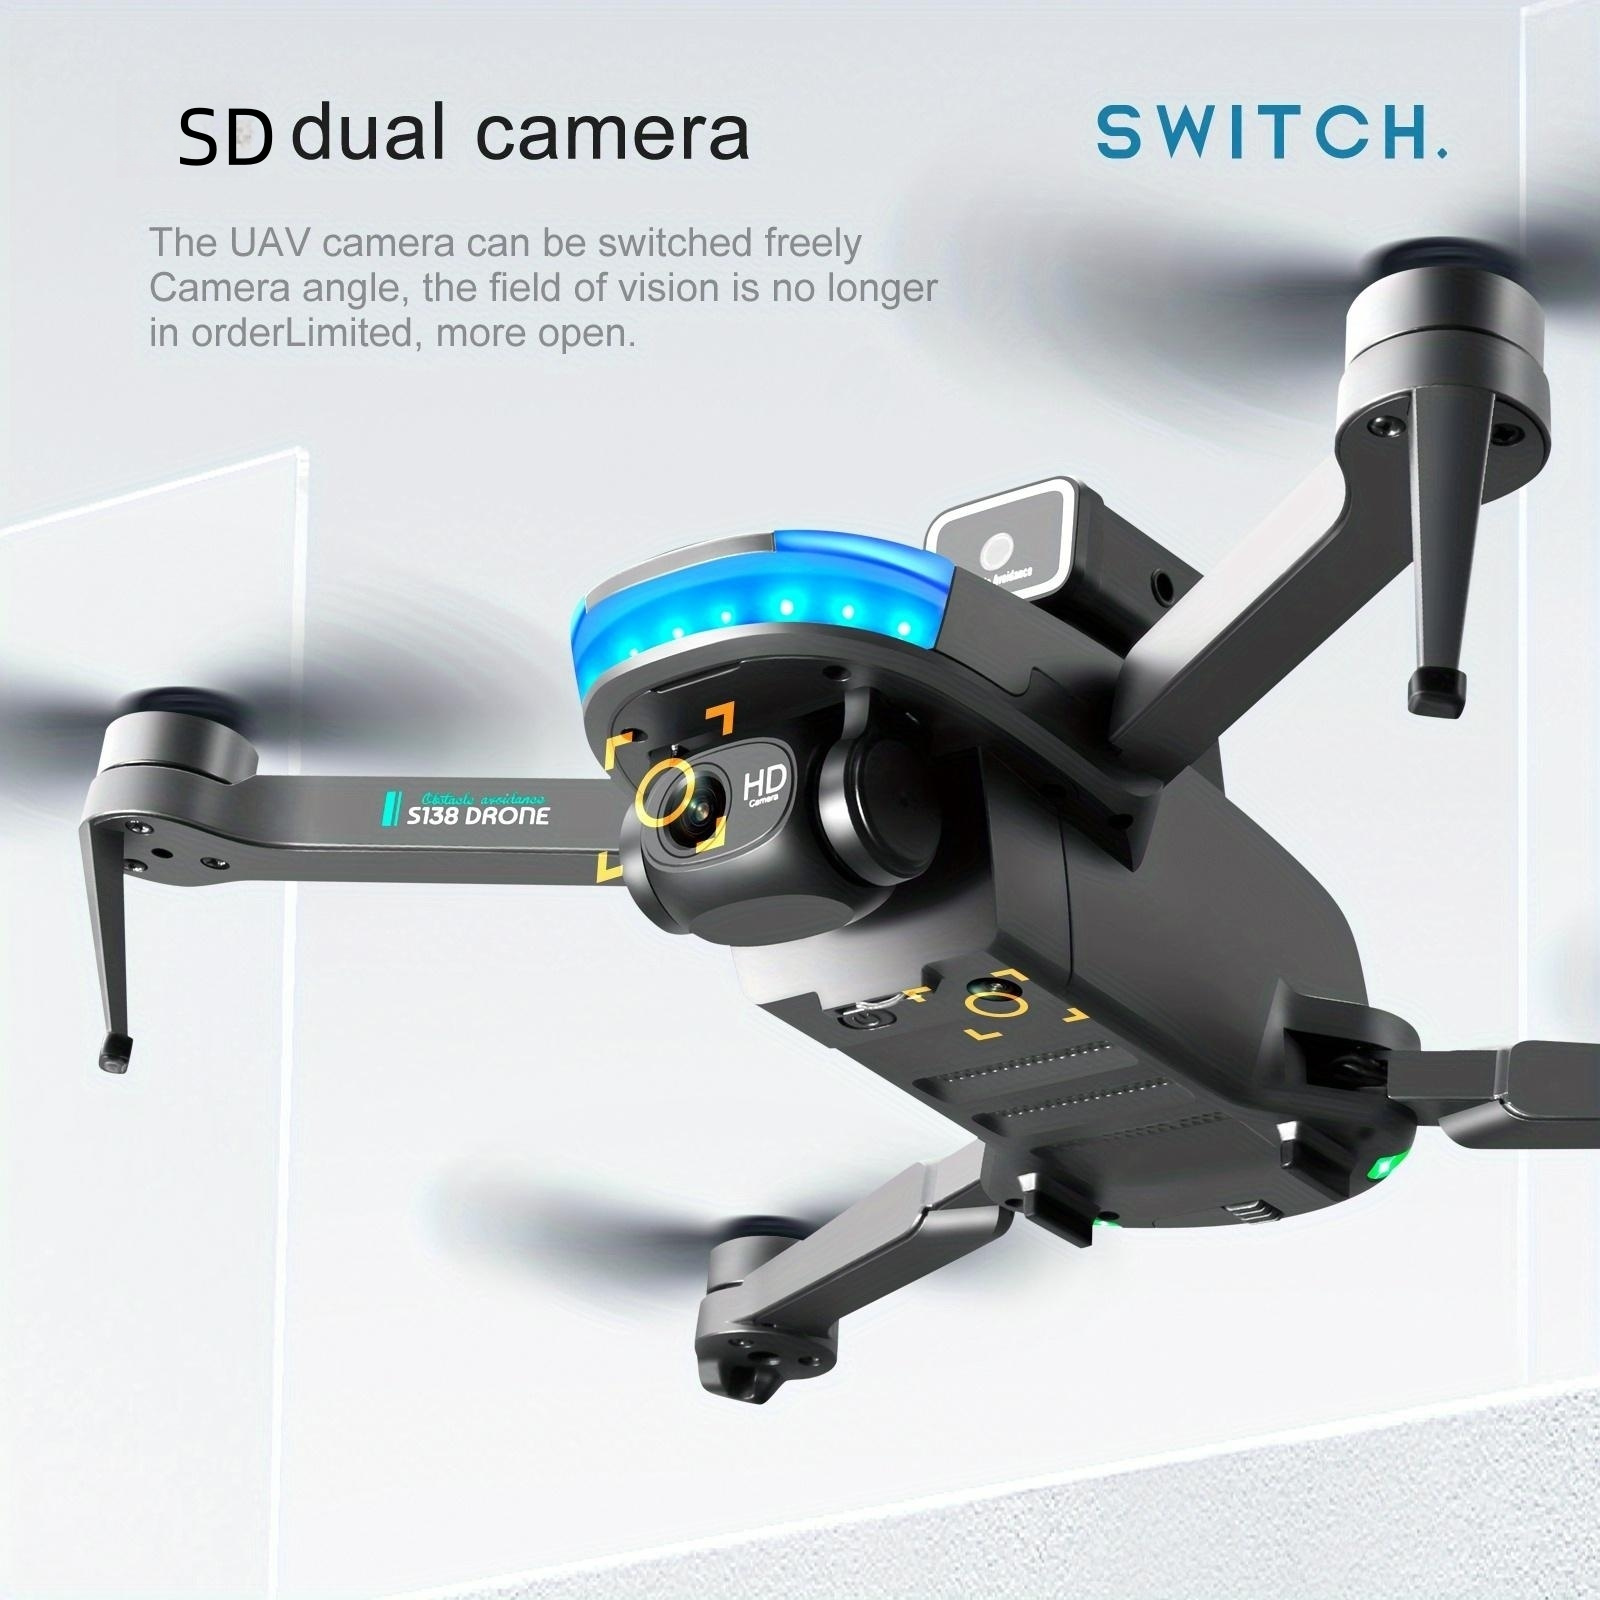 s138 brushless optical flow remote control drone with hd dual camera 1 3 batteries optical flow positioning esc camera brushless motor headless mode 360 intelligent obstacle avoidance wifi fpv details 3